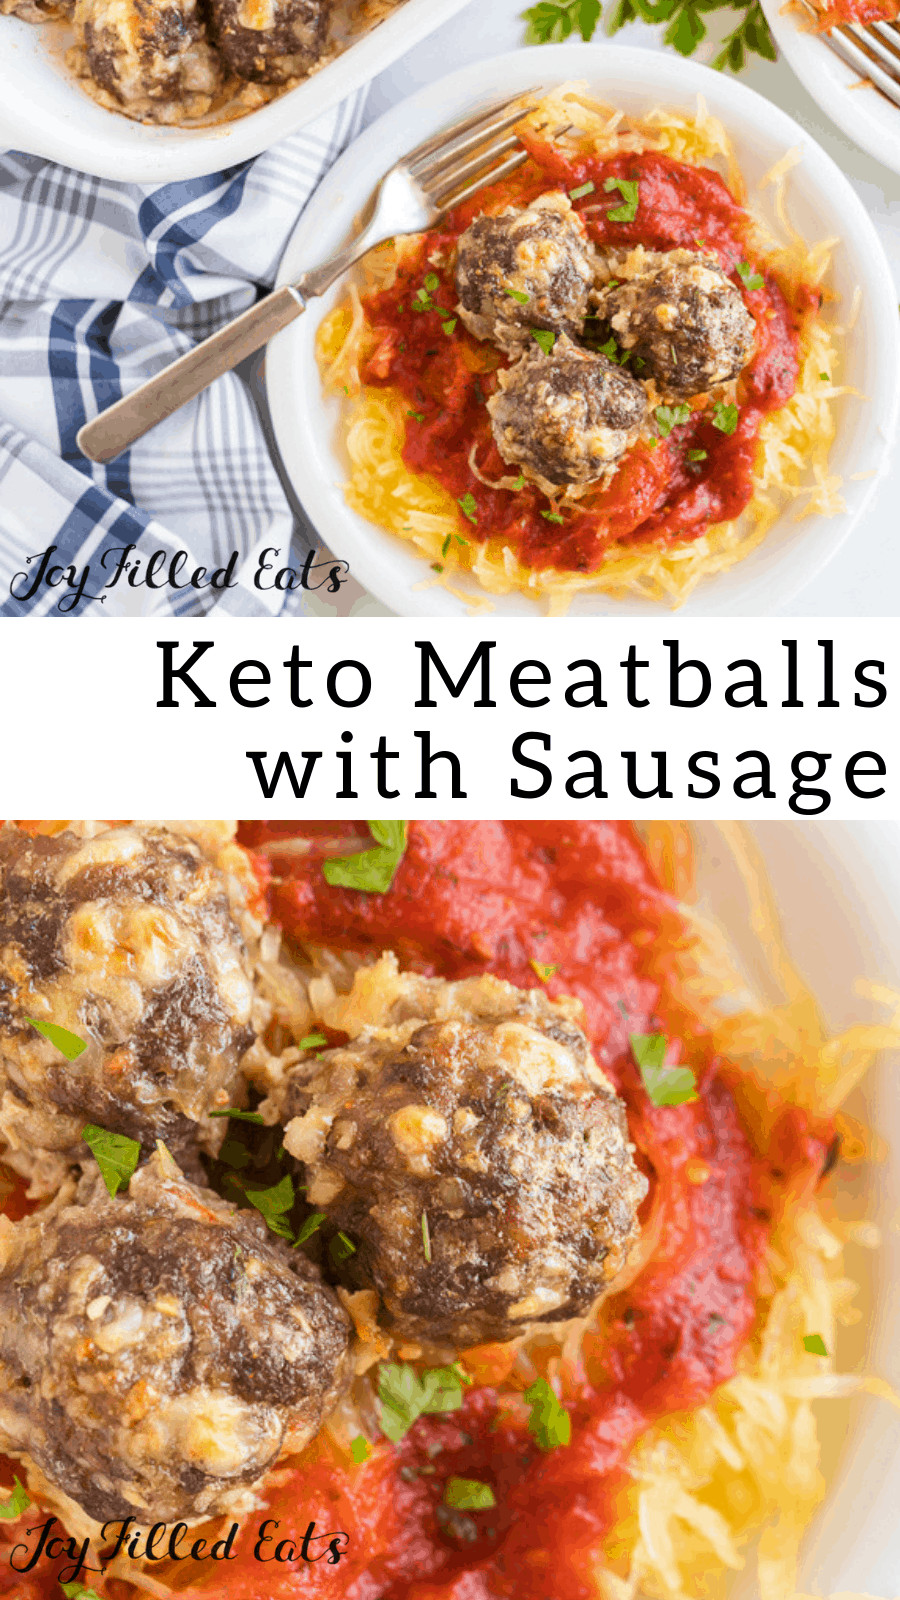 Dairy Free Keto Ground Beef Recipes
 Keto Meatballs with Sausage and Ground Beef Low Carb